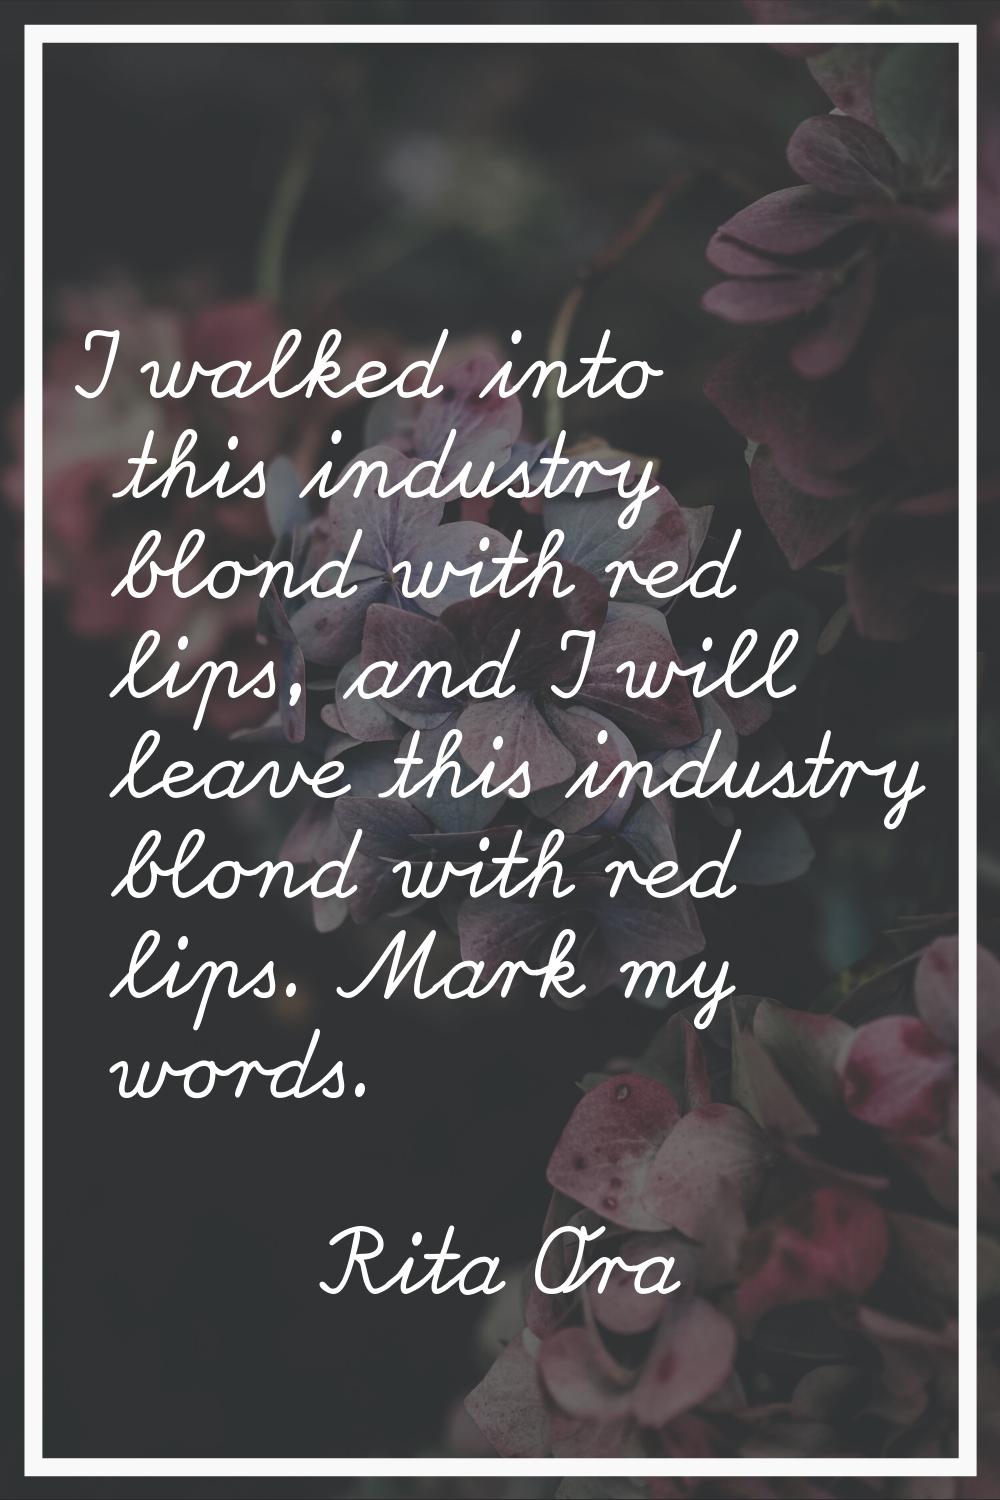 I walked into this industry blond with red lips, and I will leave this industry blond with red lips